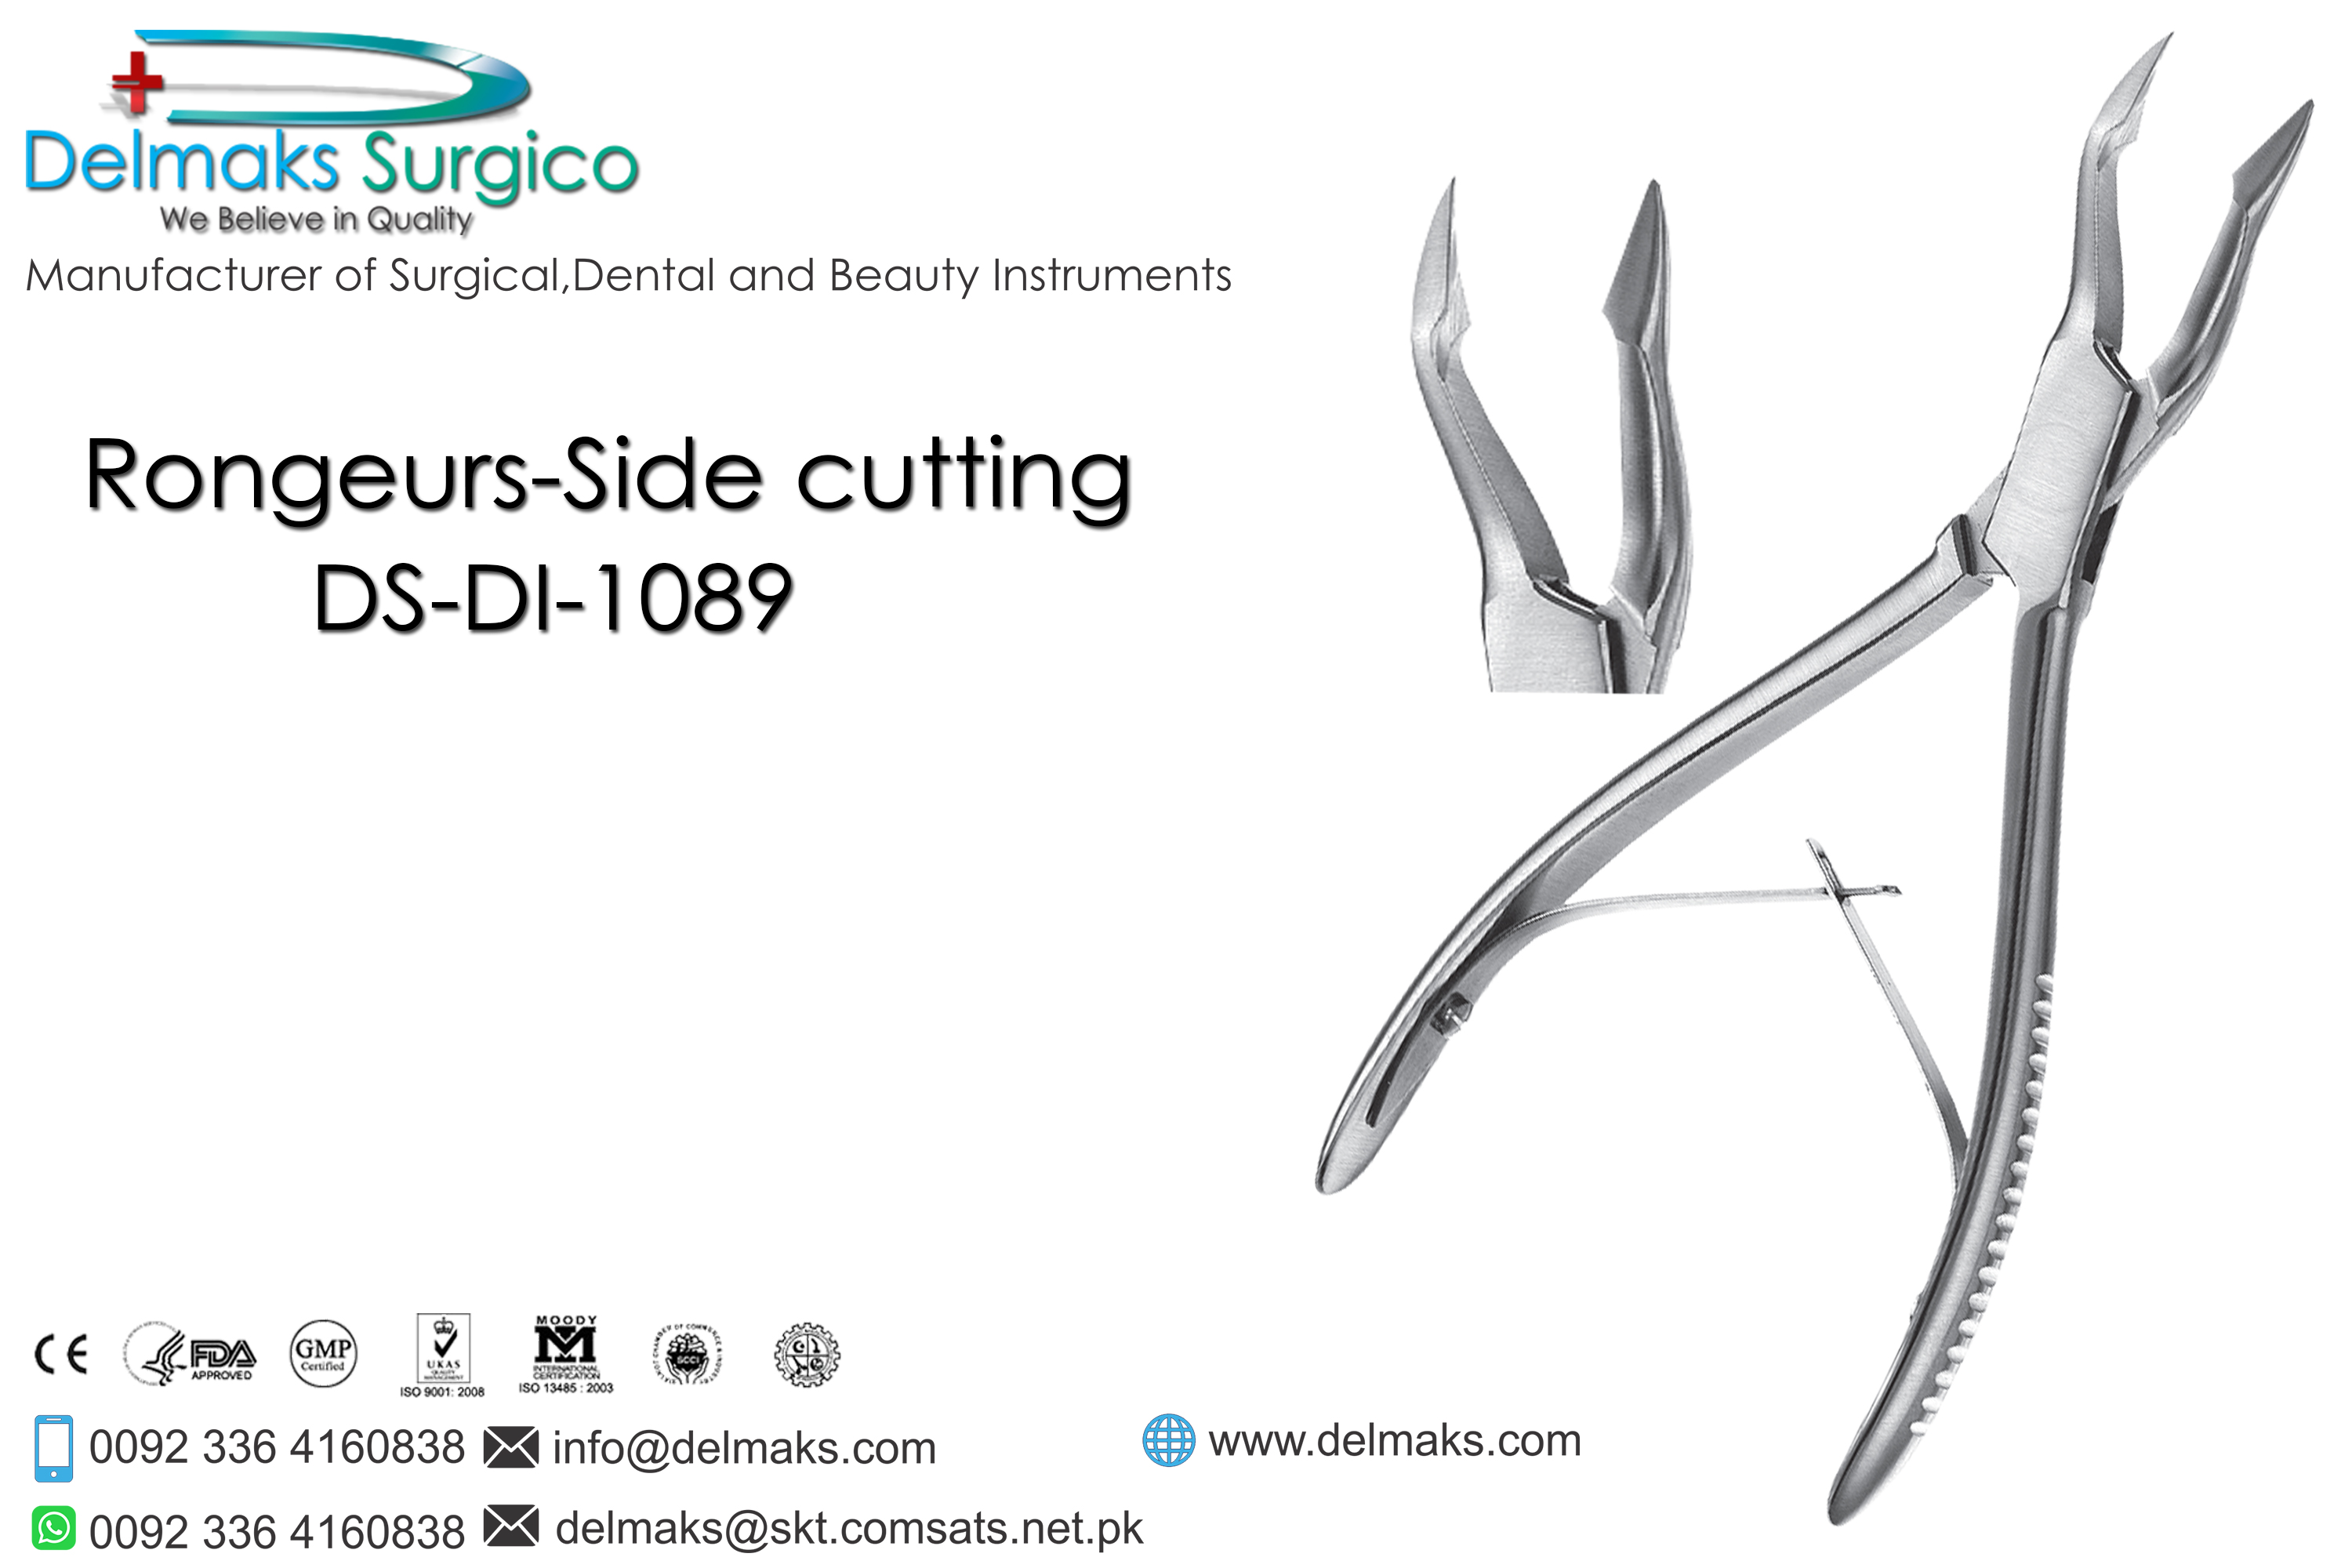 Rongeurs Side Cutting-Oral And Maxillofacial Surgery Instruments-Dental Instruments-Delmaks Surgico